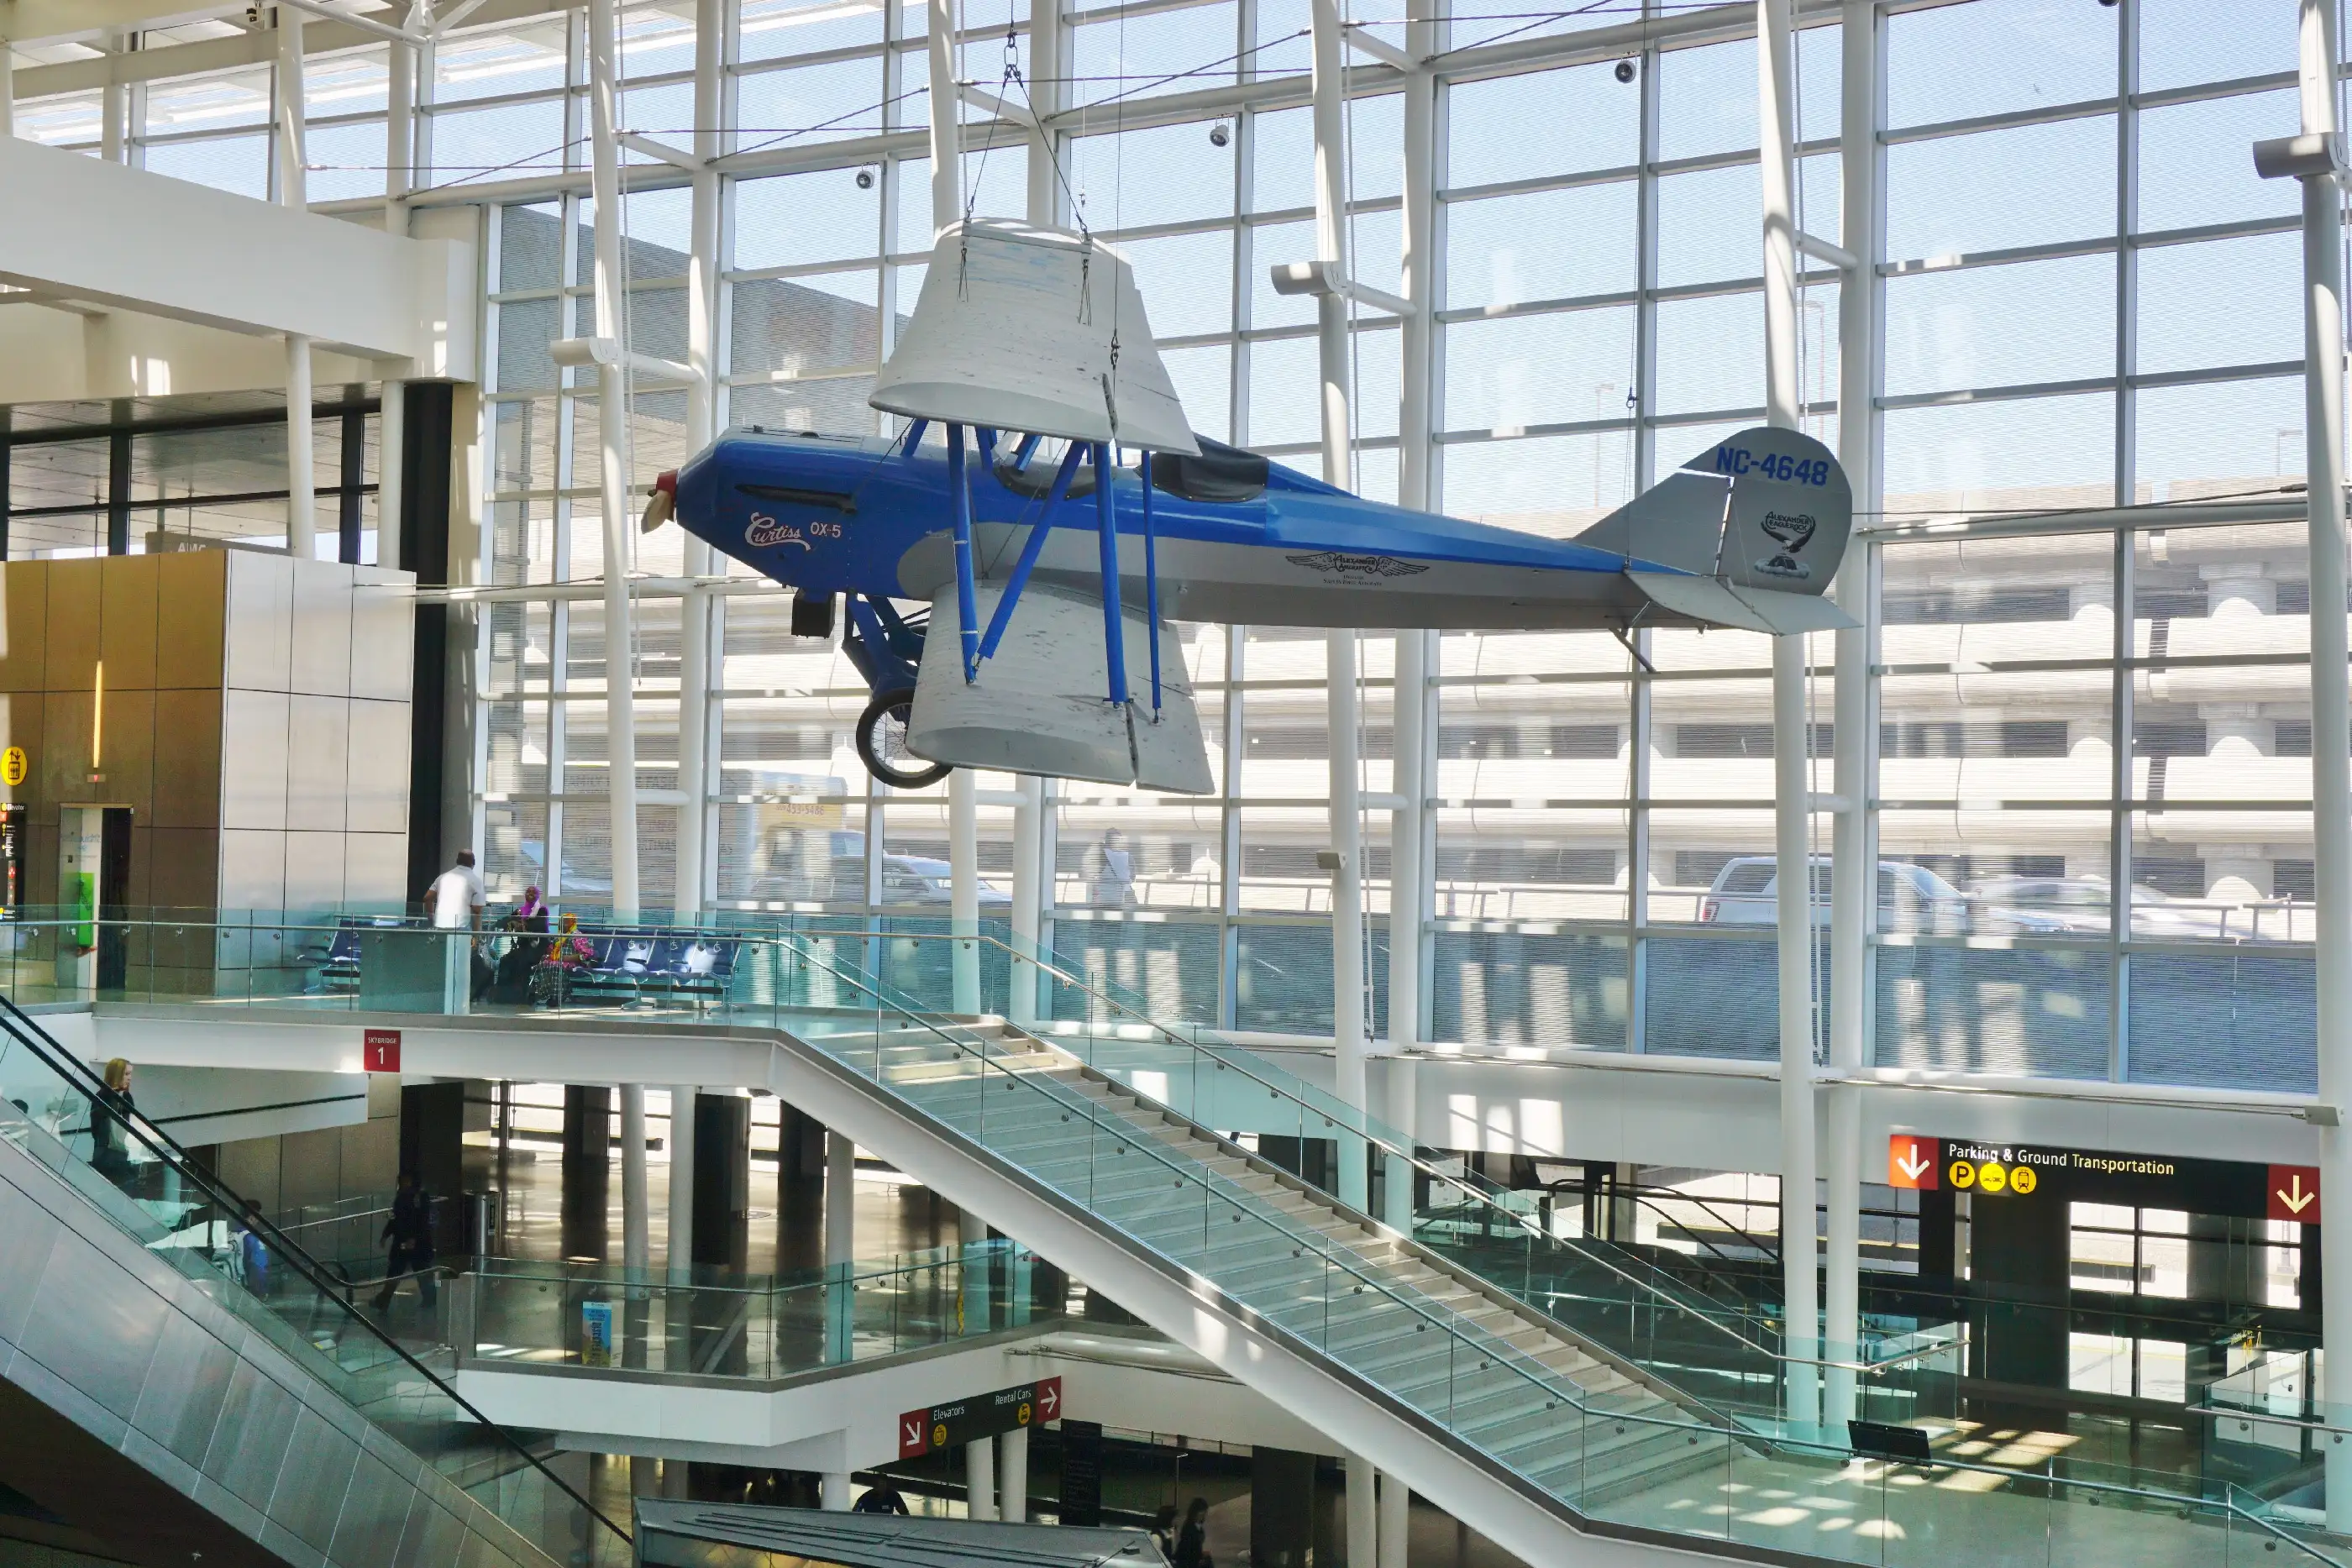 The Sea-Tac Seattle-Tacoma International Airport (SEA) is the largest airport in the Pacific Northwest of the United States. It is a main hub for Alaska Airlines.